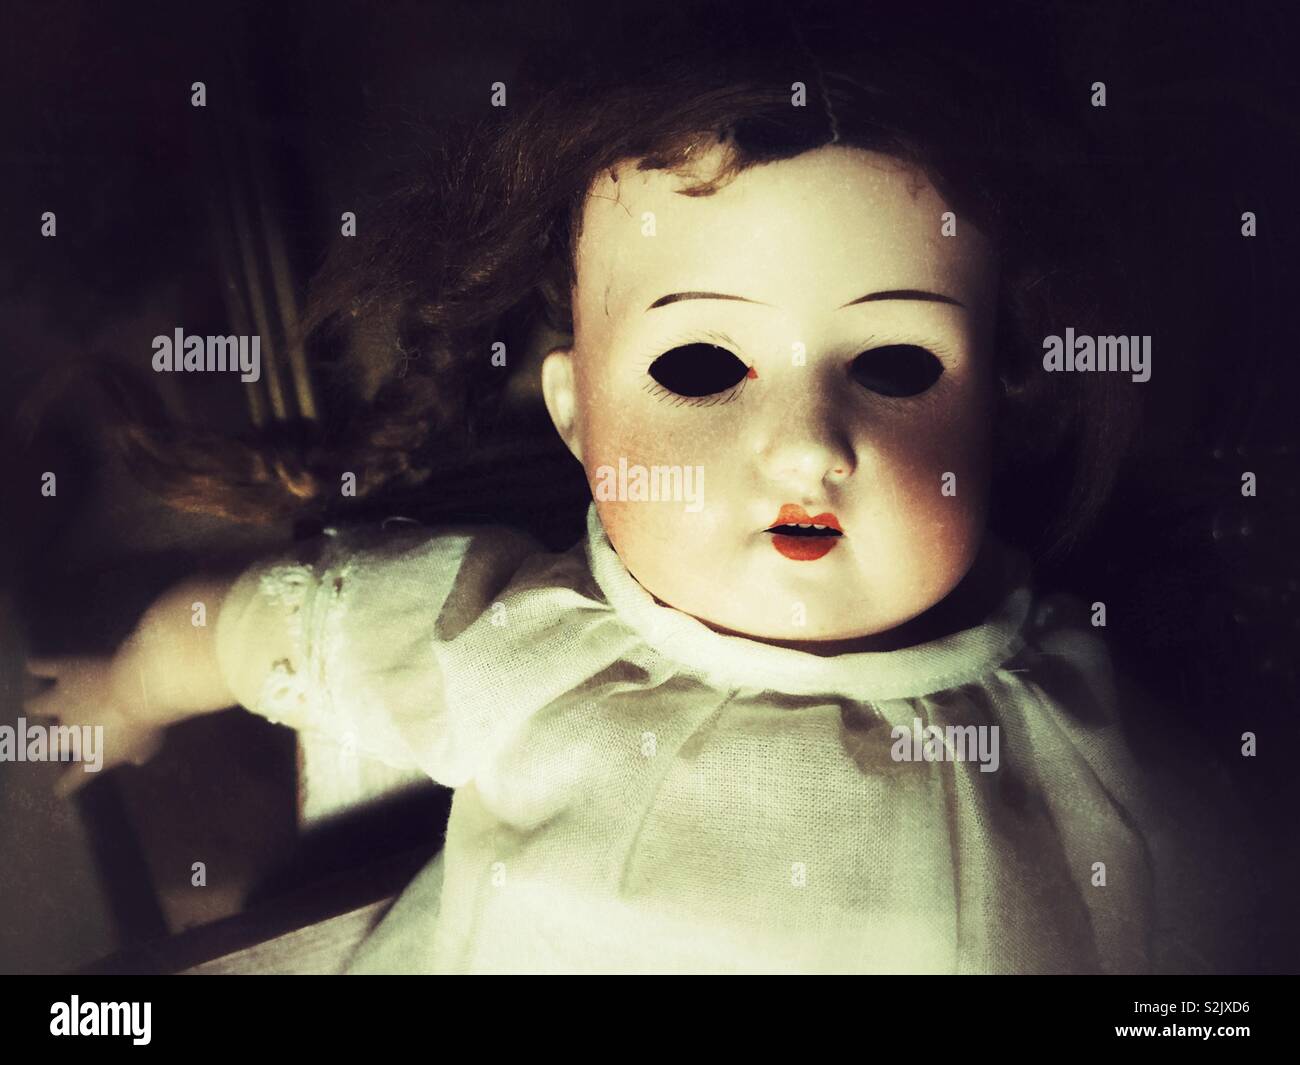 Creepy antique German baby doll with missing eyes Stock Photo